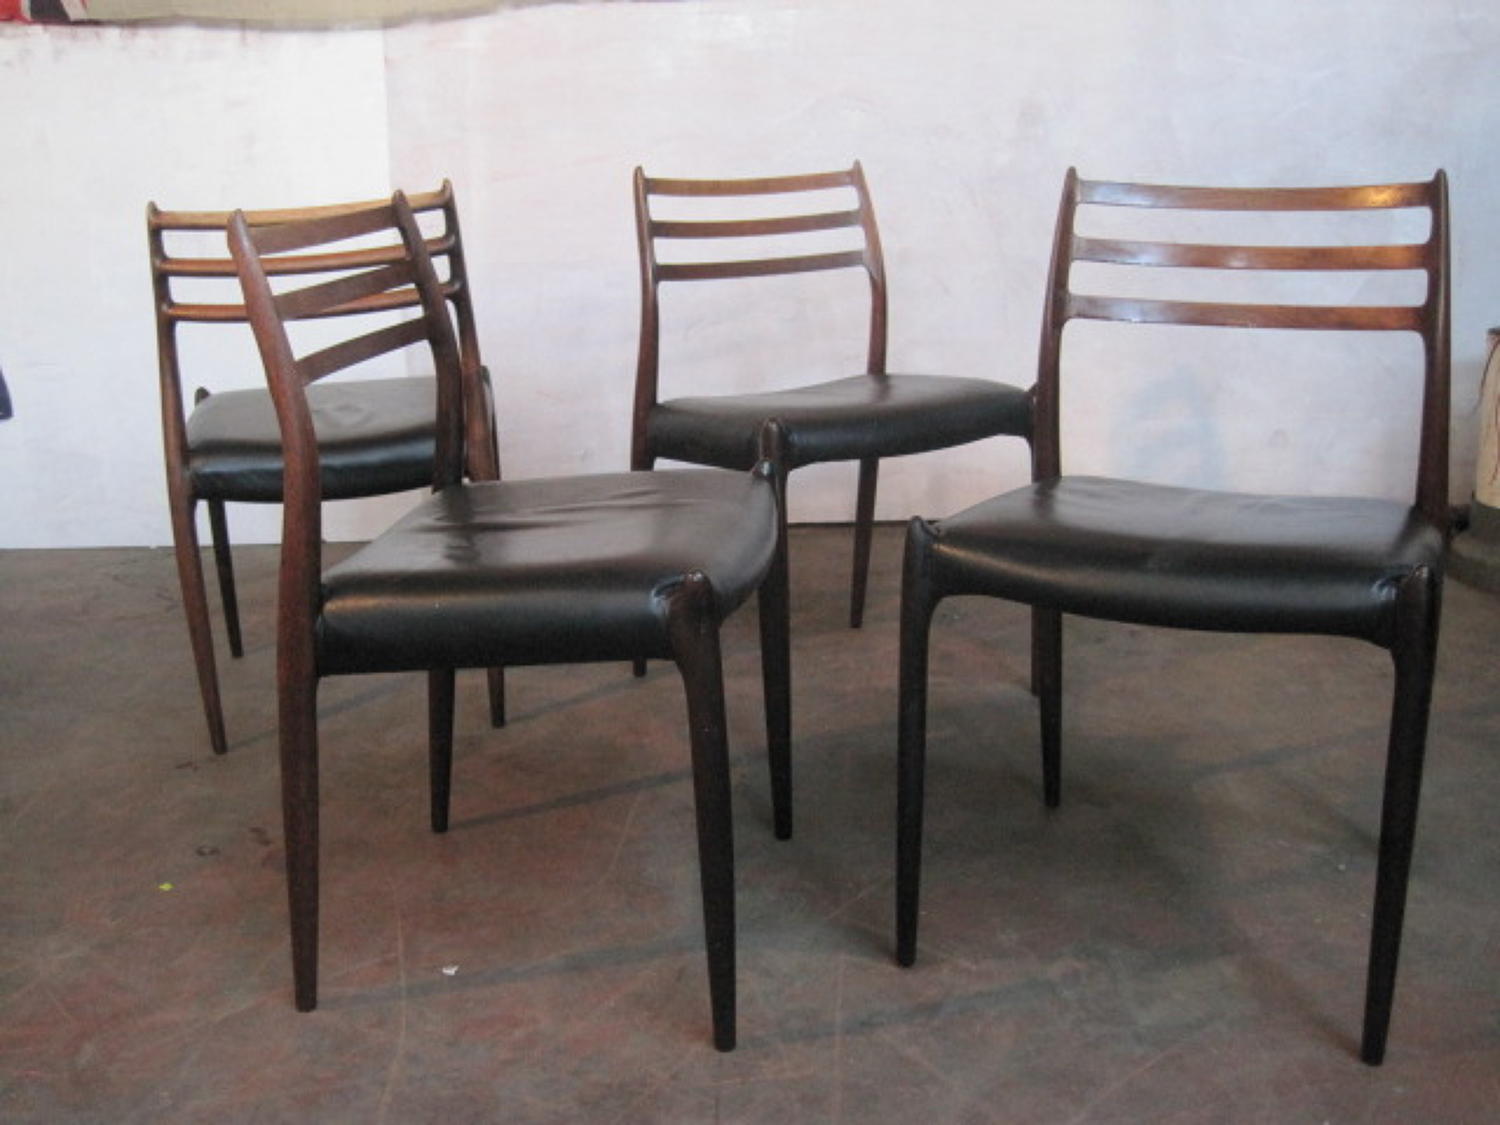 Four rosewood dining chairs by N.O Moller model 78